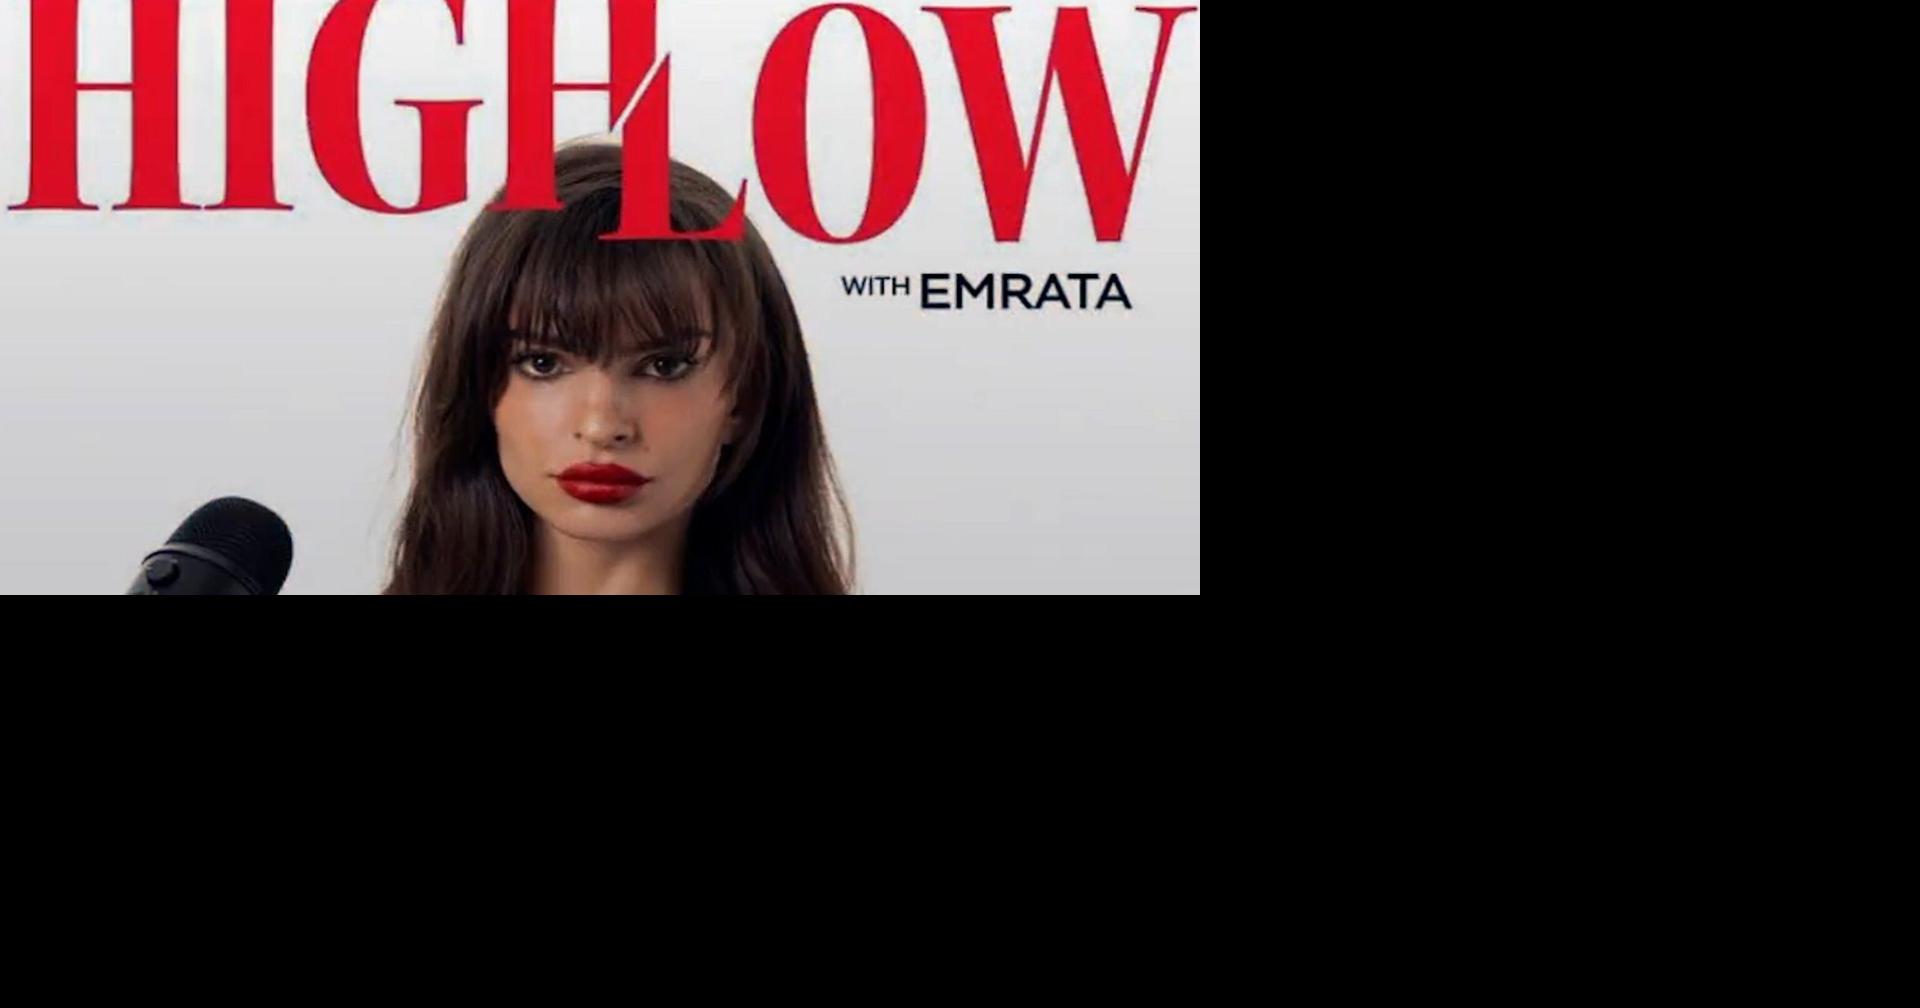 High Low with EmRata